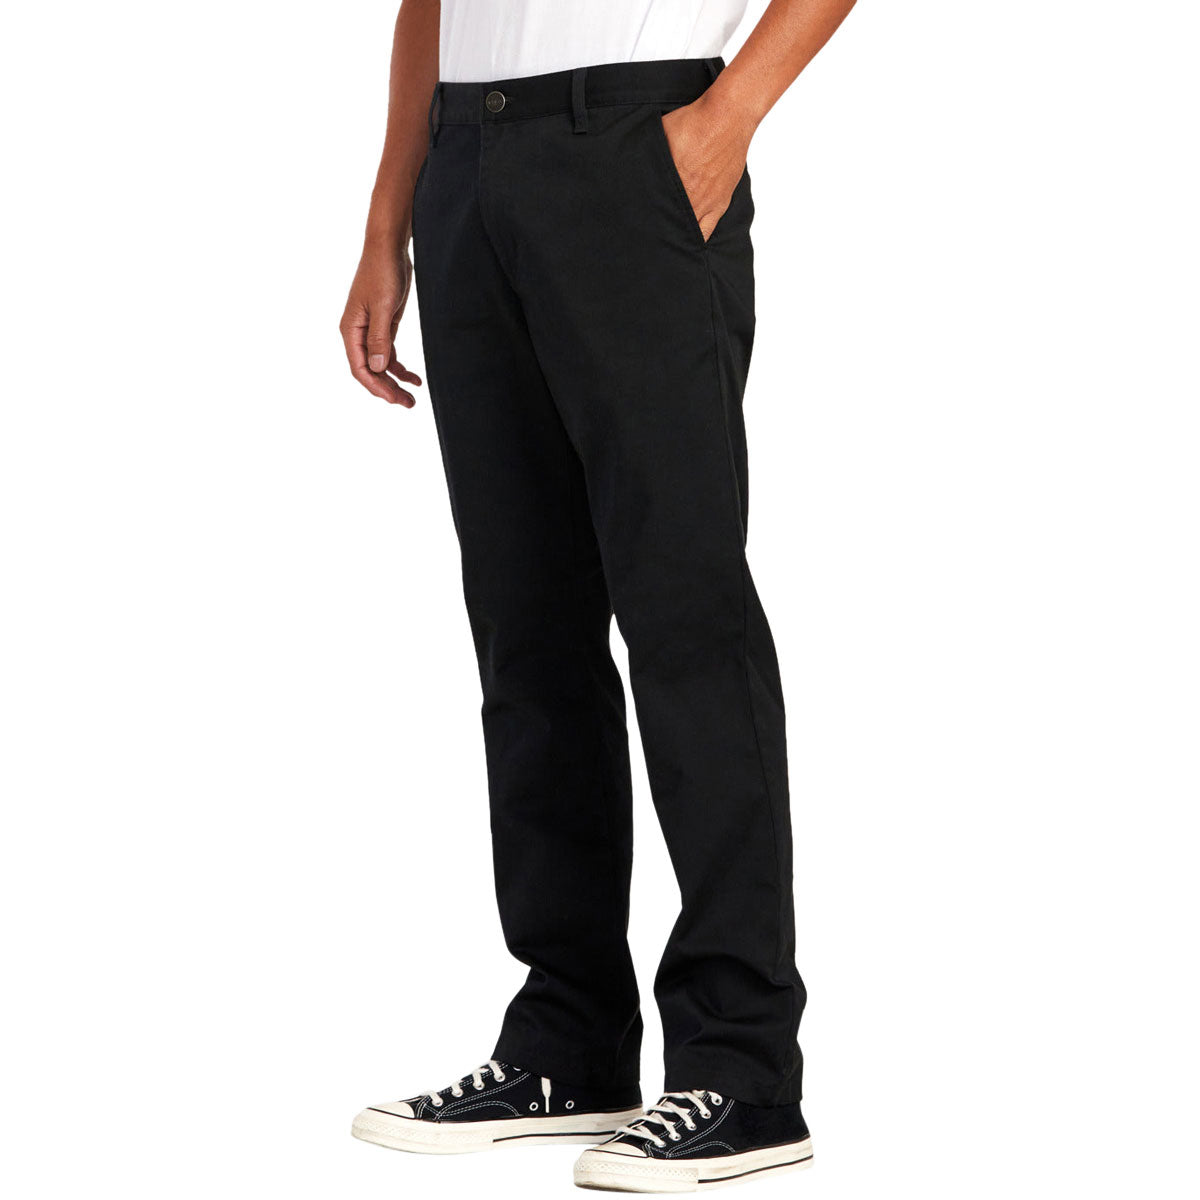 RVCA The Weekend Stretch Pants - New Black image 3